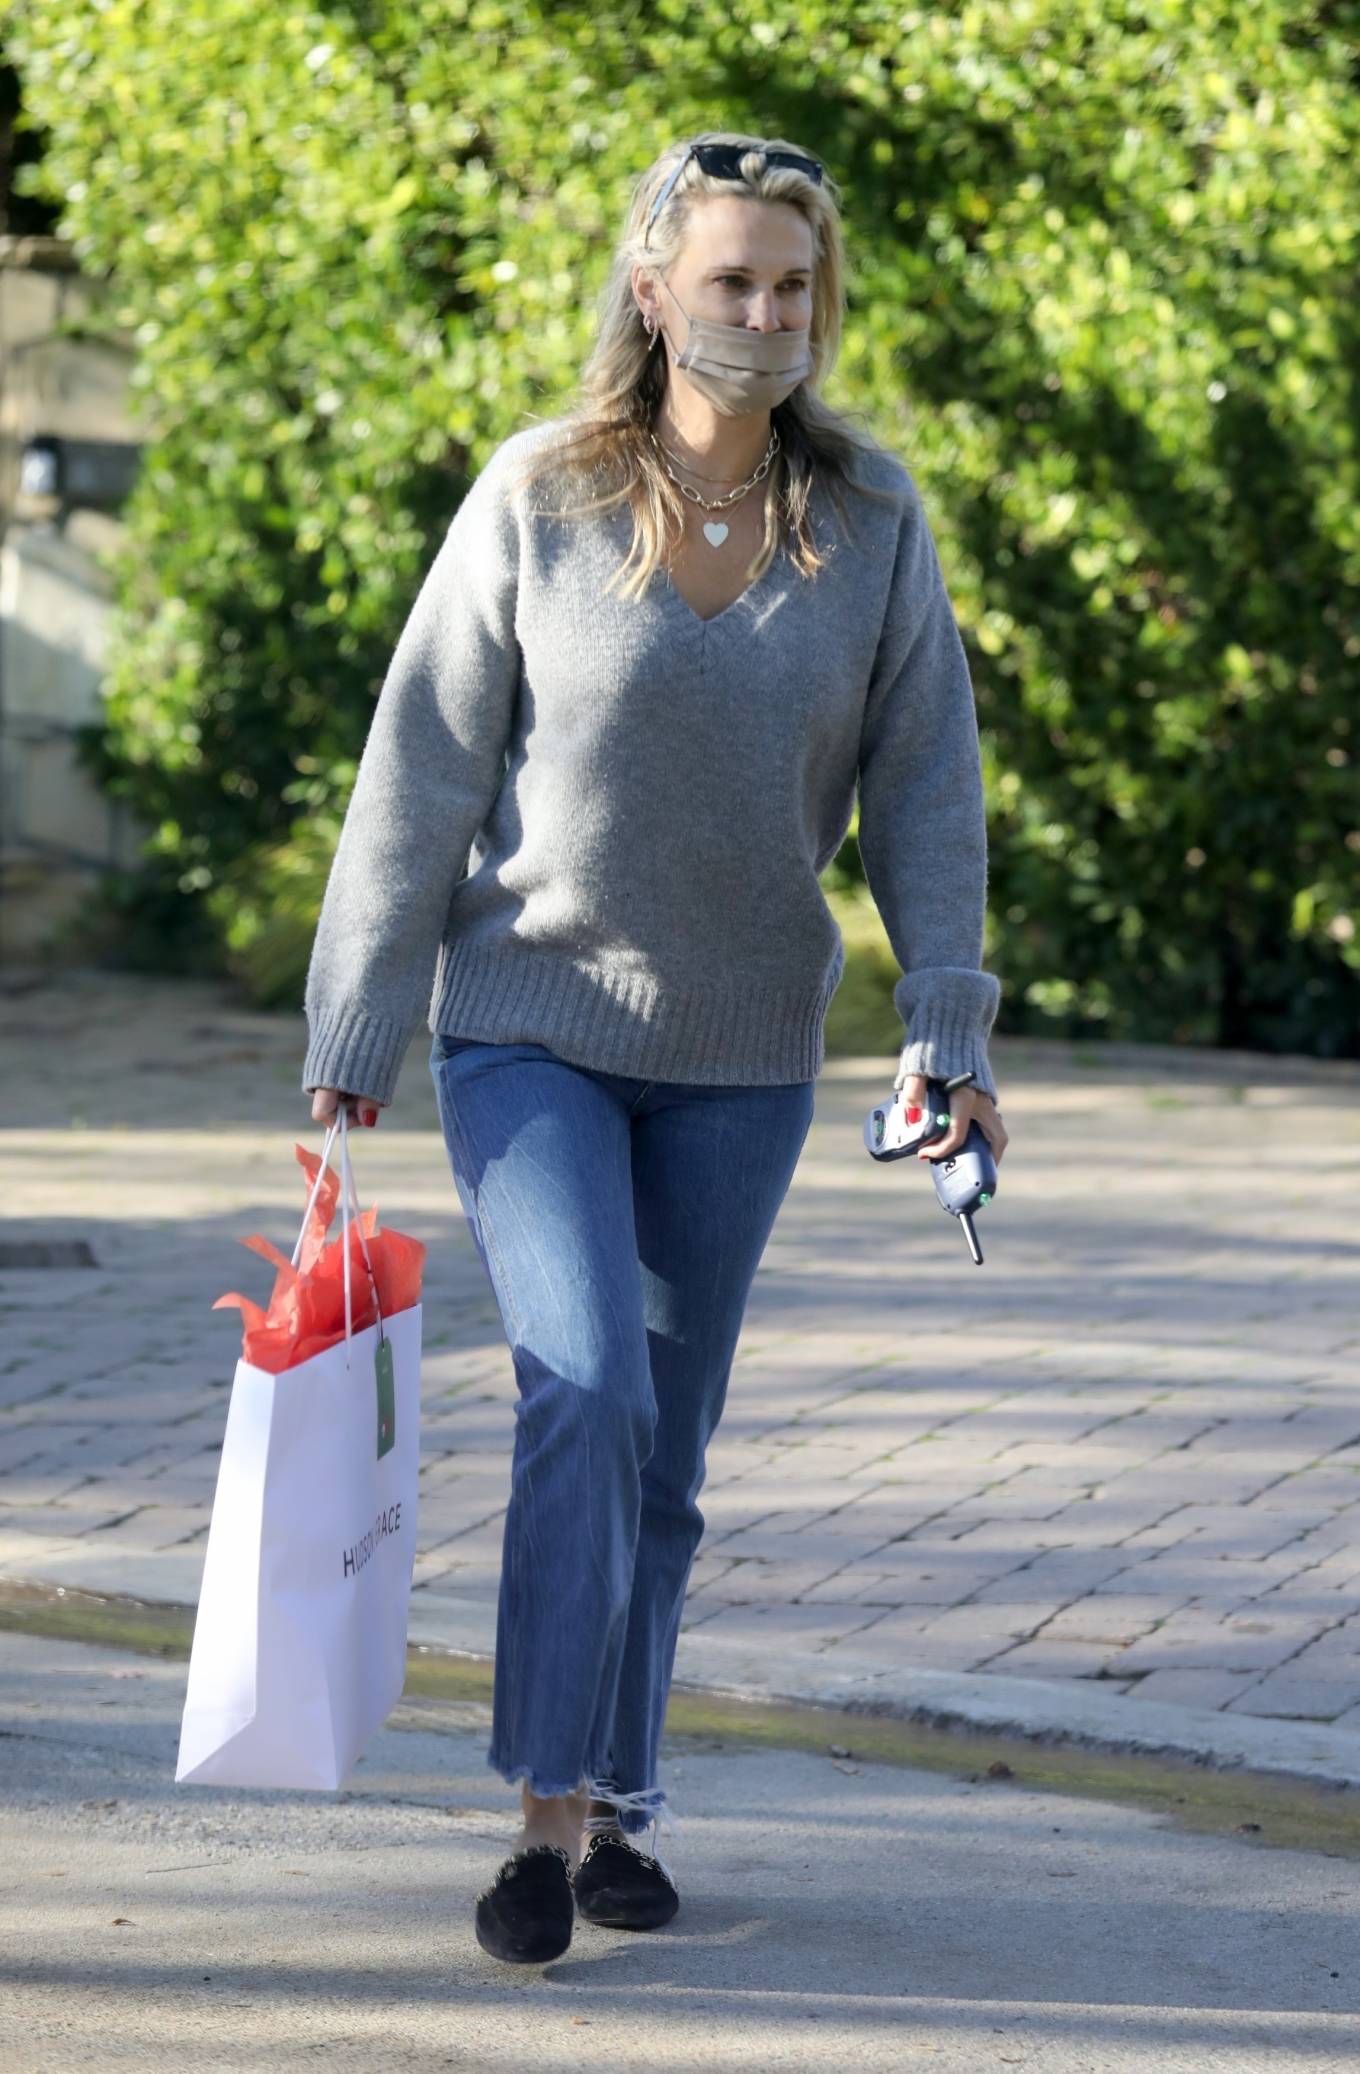 Molly Sims - Seen in denim and a sweater top in Brentwood